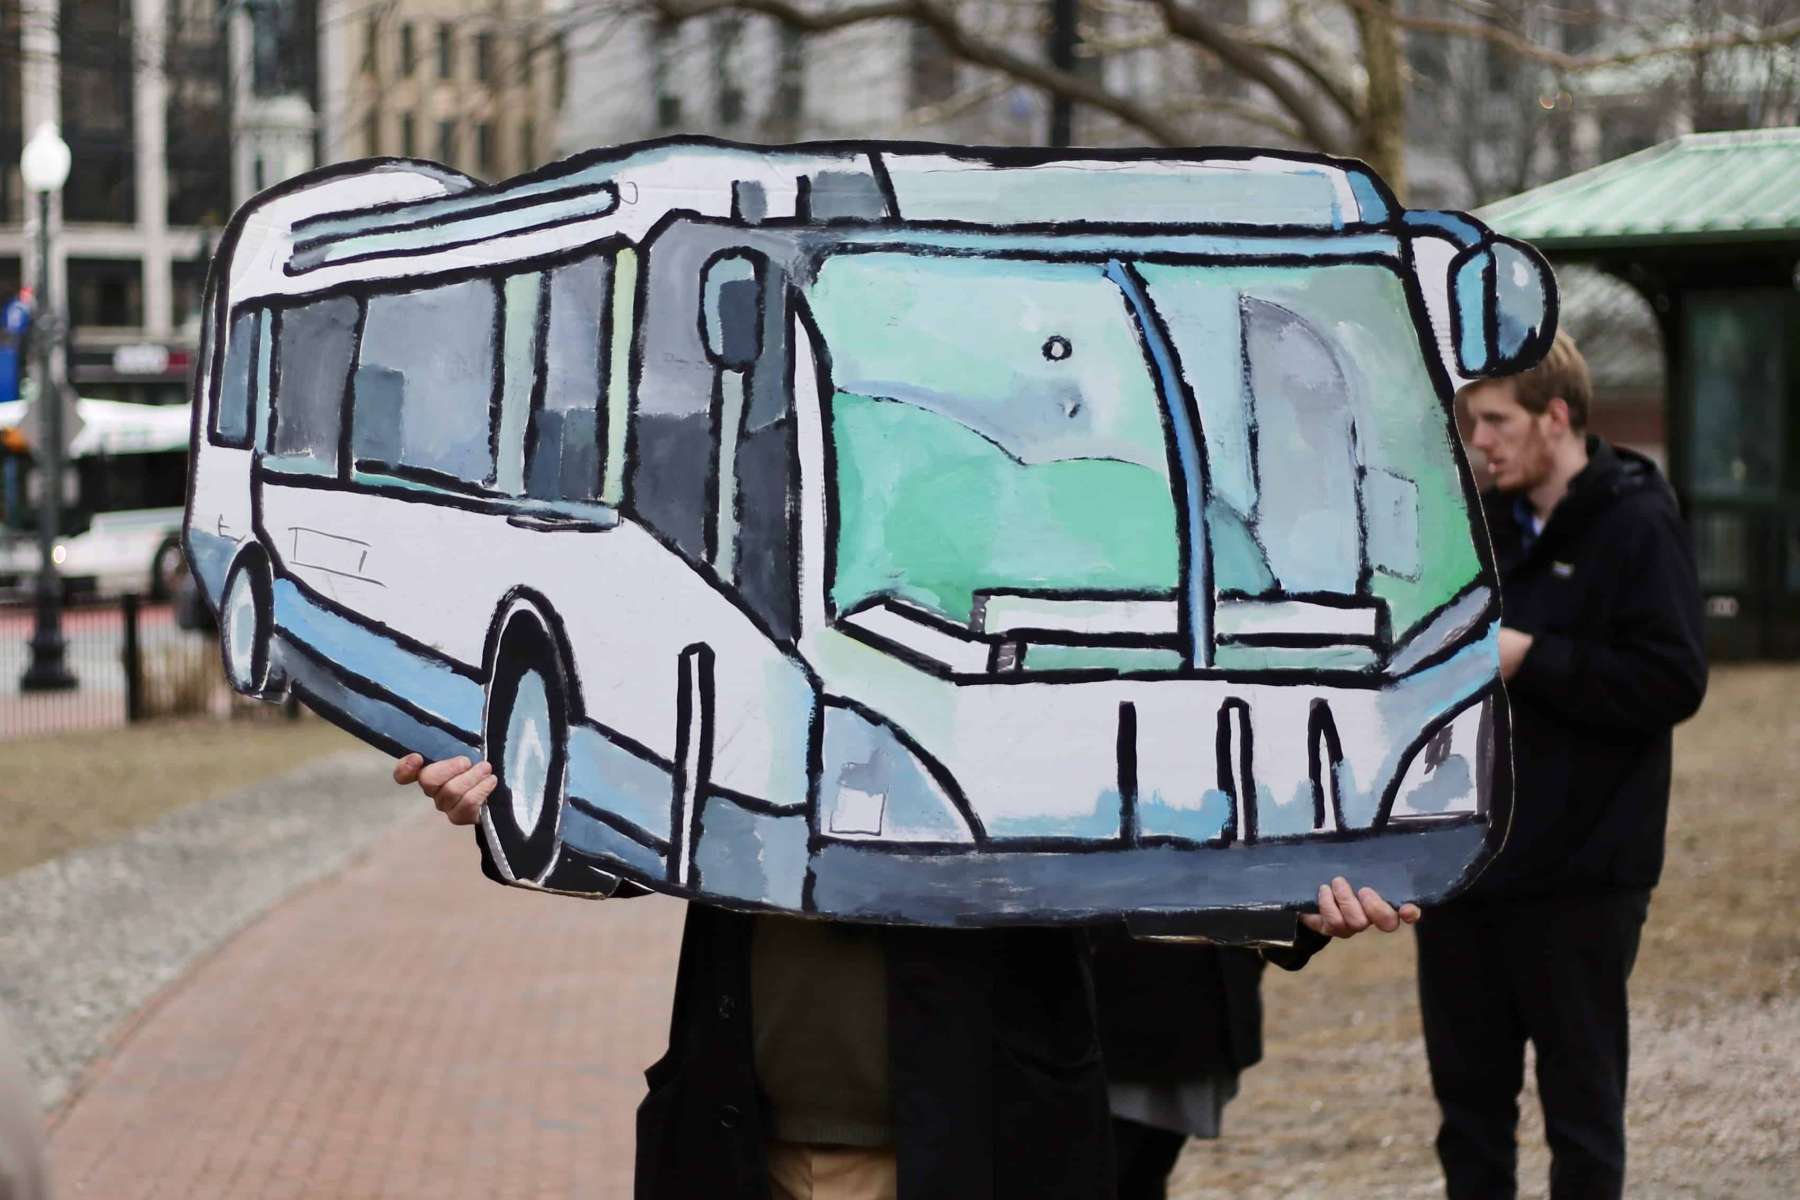 Rhode Island News: As RI struggles with public transportation, activists hold annual Transit Equity event